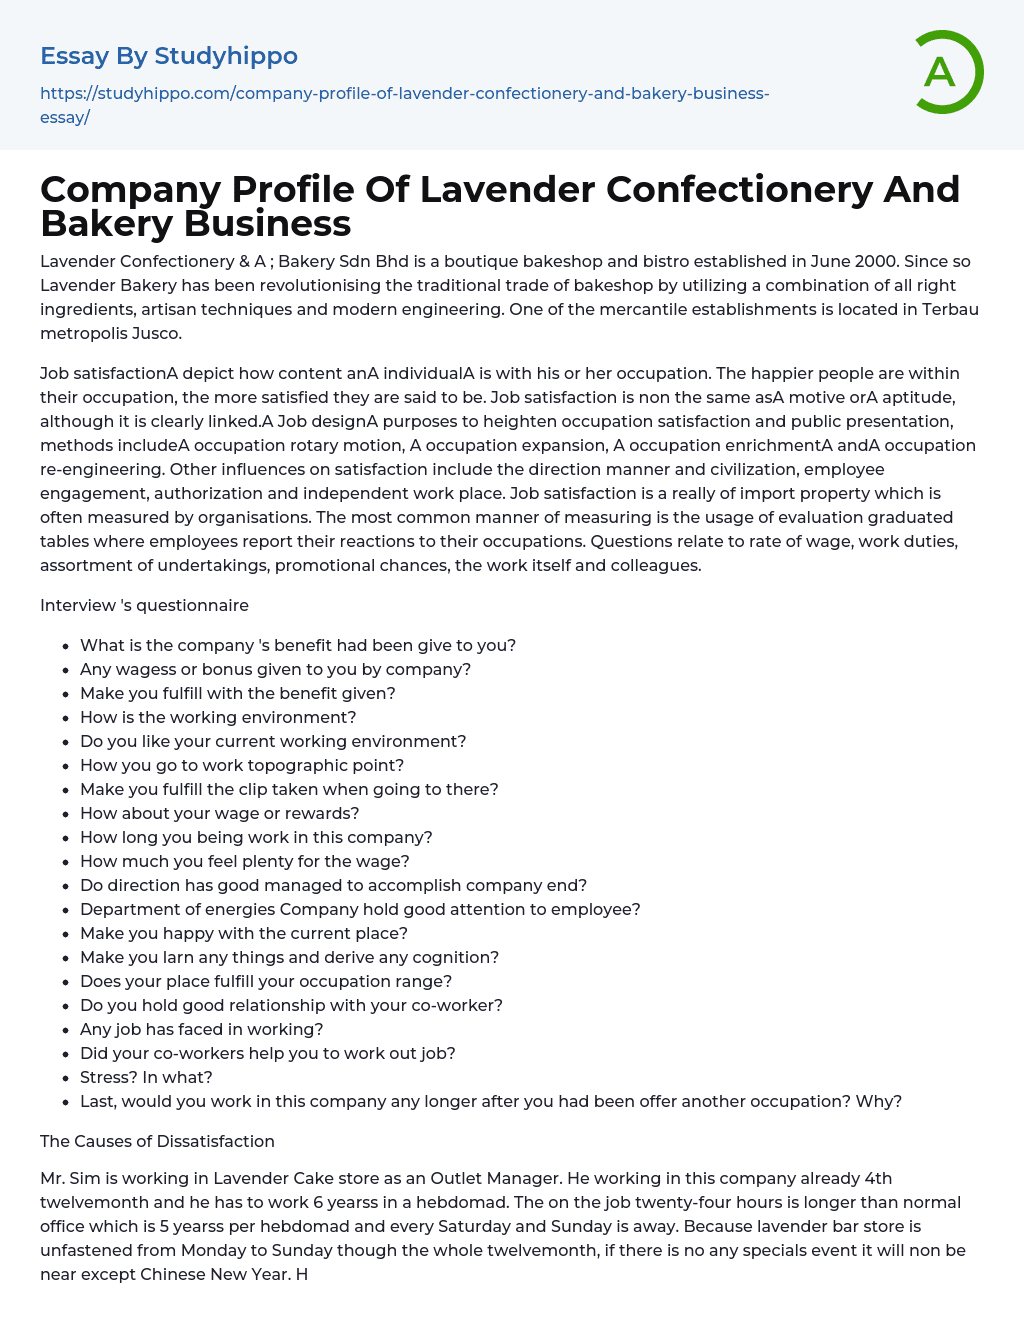 Company Profile Of Lavender Confectionery And Bakery Business Essay Example